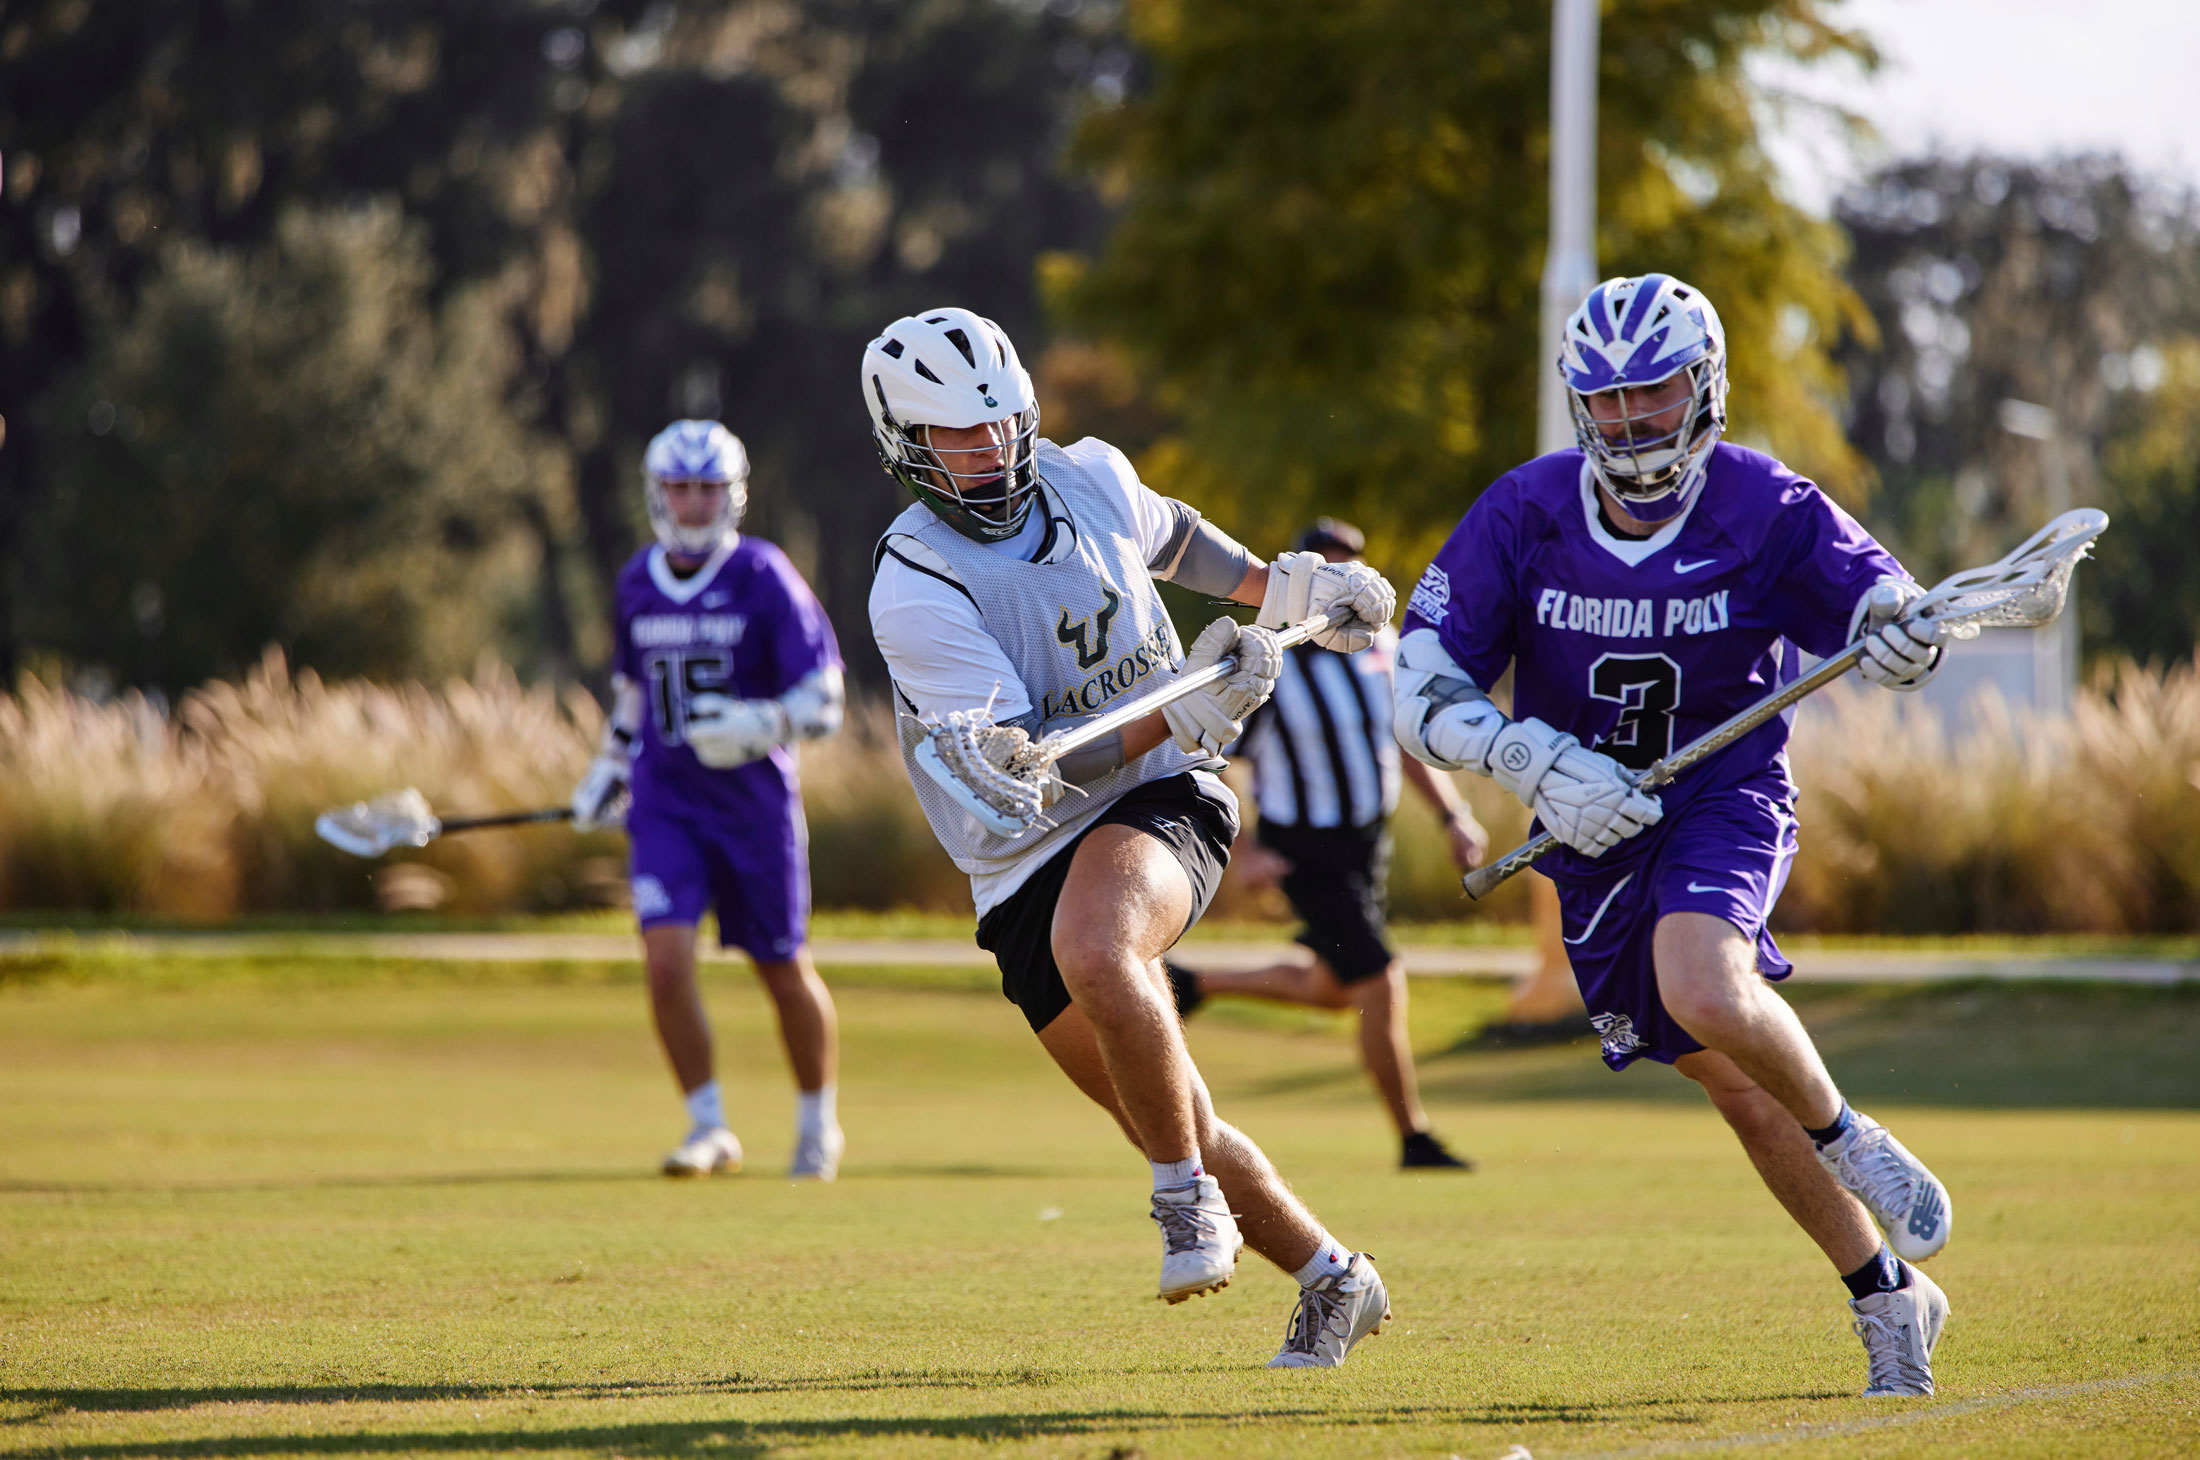 Florida Polytechnic University student Jack Koziel gets past a defenseman from the University of South Florida Division I lacrosse team.